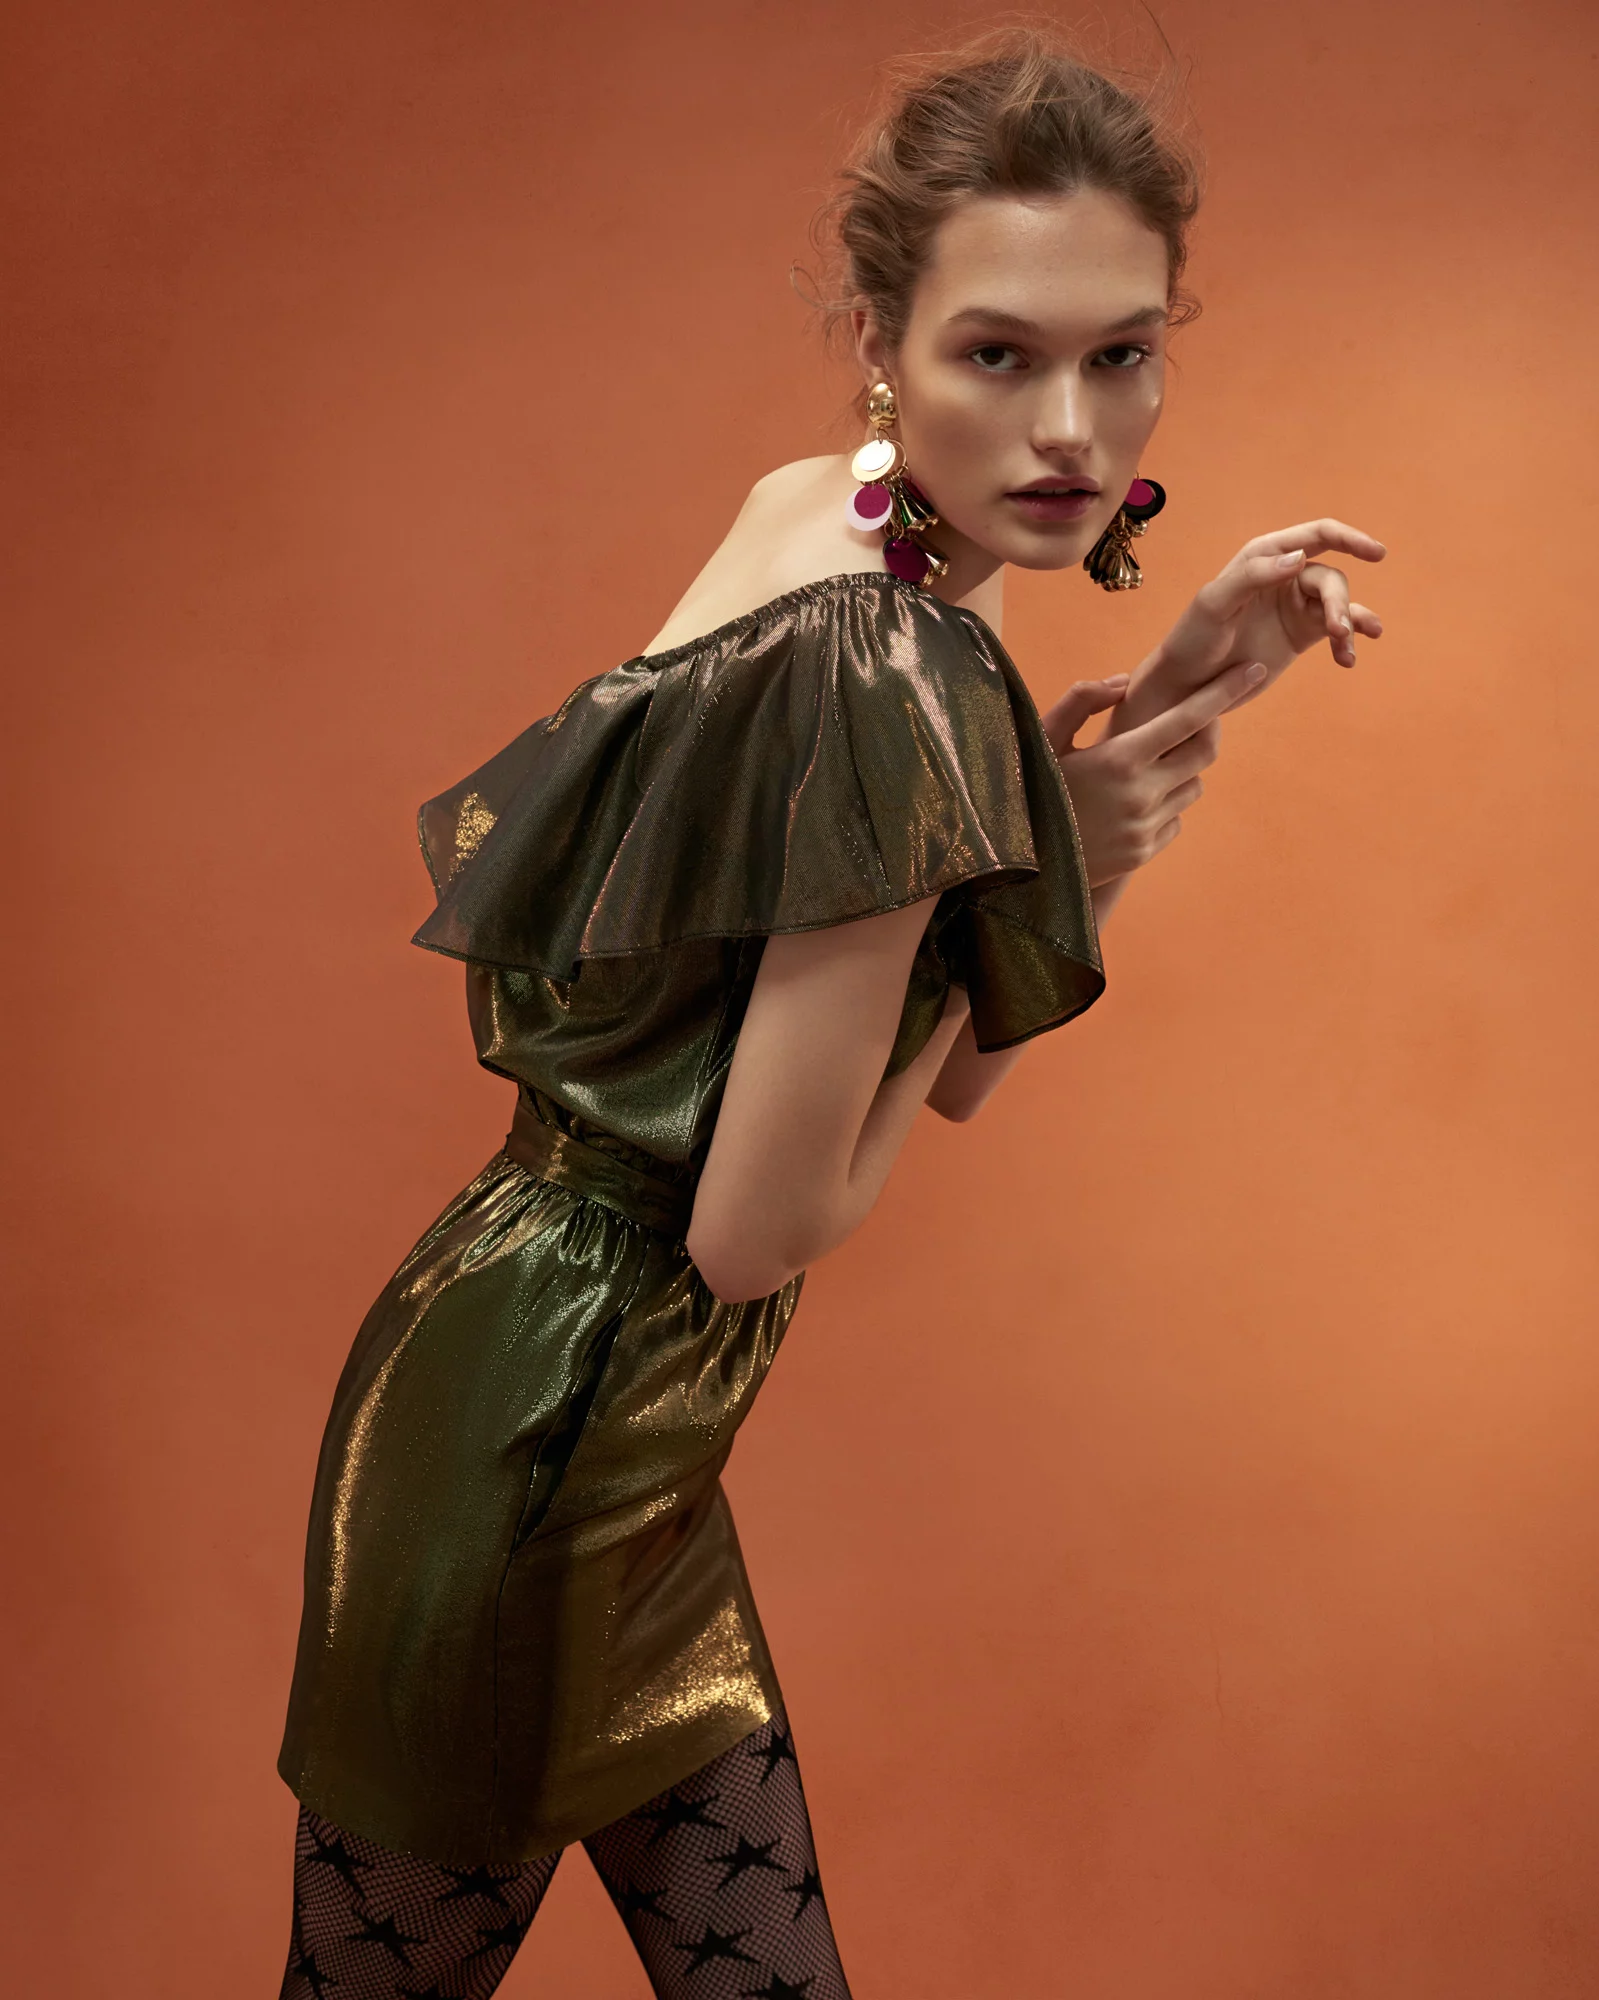 Grazia 2 by Andreas ORTNER